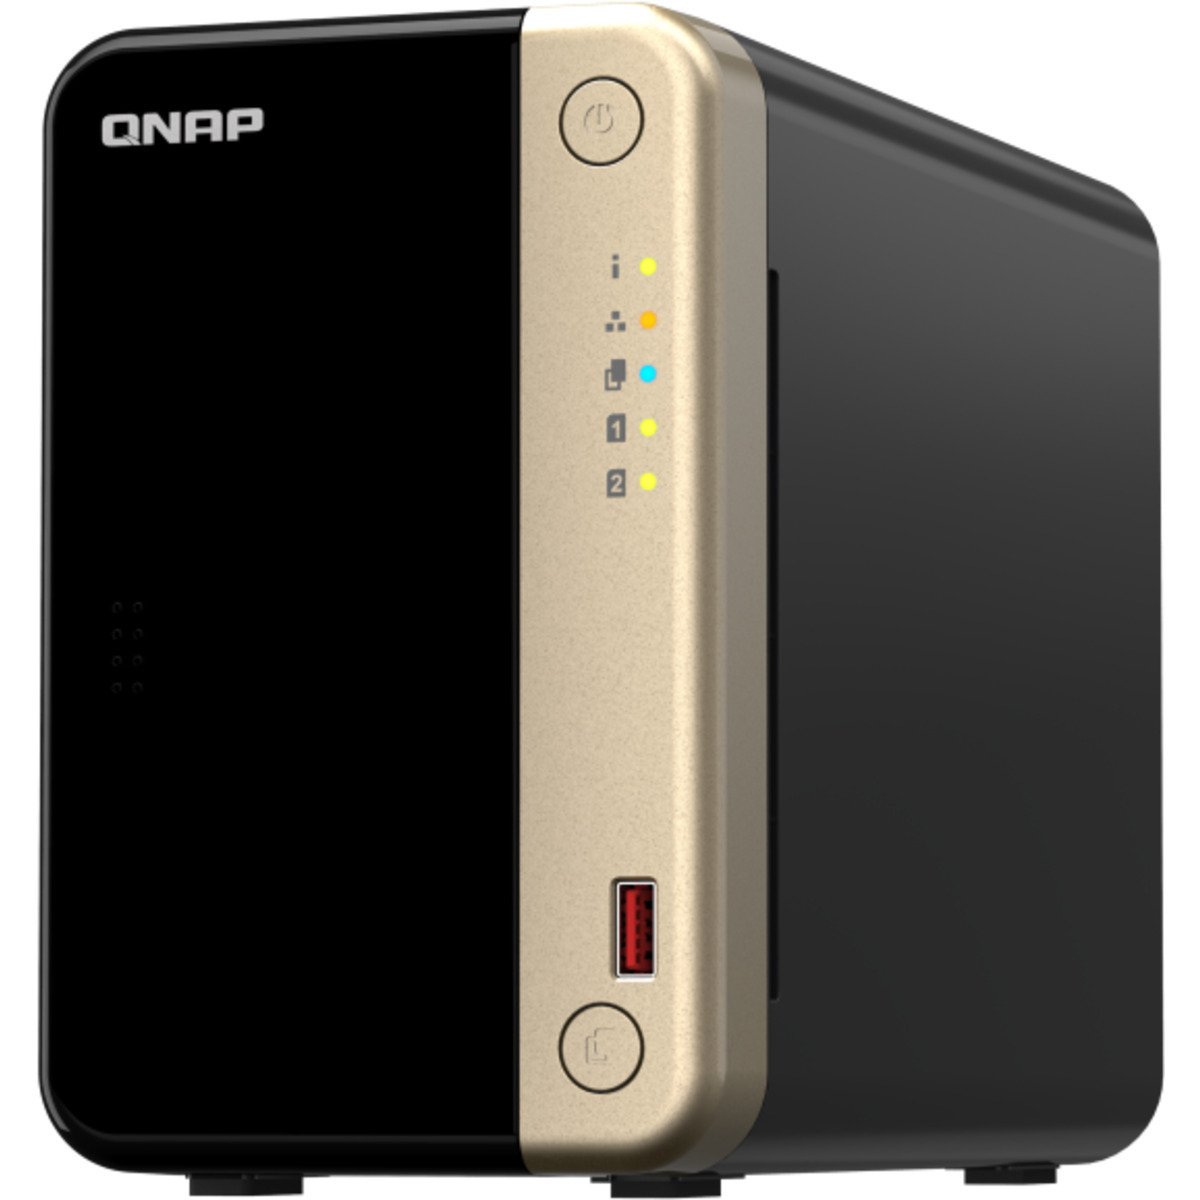 QNAP TS-264 16tb 2-Bay Desktop Multimedia / Power User / Business NAS - Network Attached Storage Device 2x8tb Seagate EXOS 7E10 ST8000NM017B 3.5 7200rpm SATA 6Gb/s HDD ENTERPRISE Class Drives Installed - Burn-In Tested - ON SALE TS-264